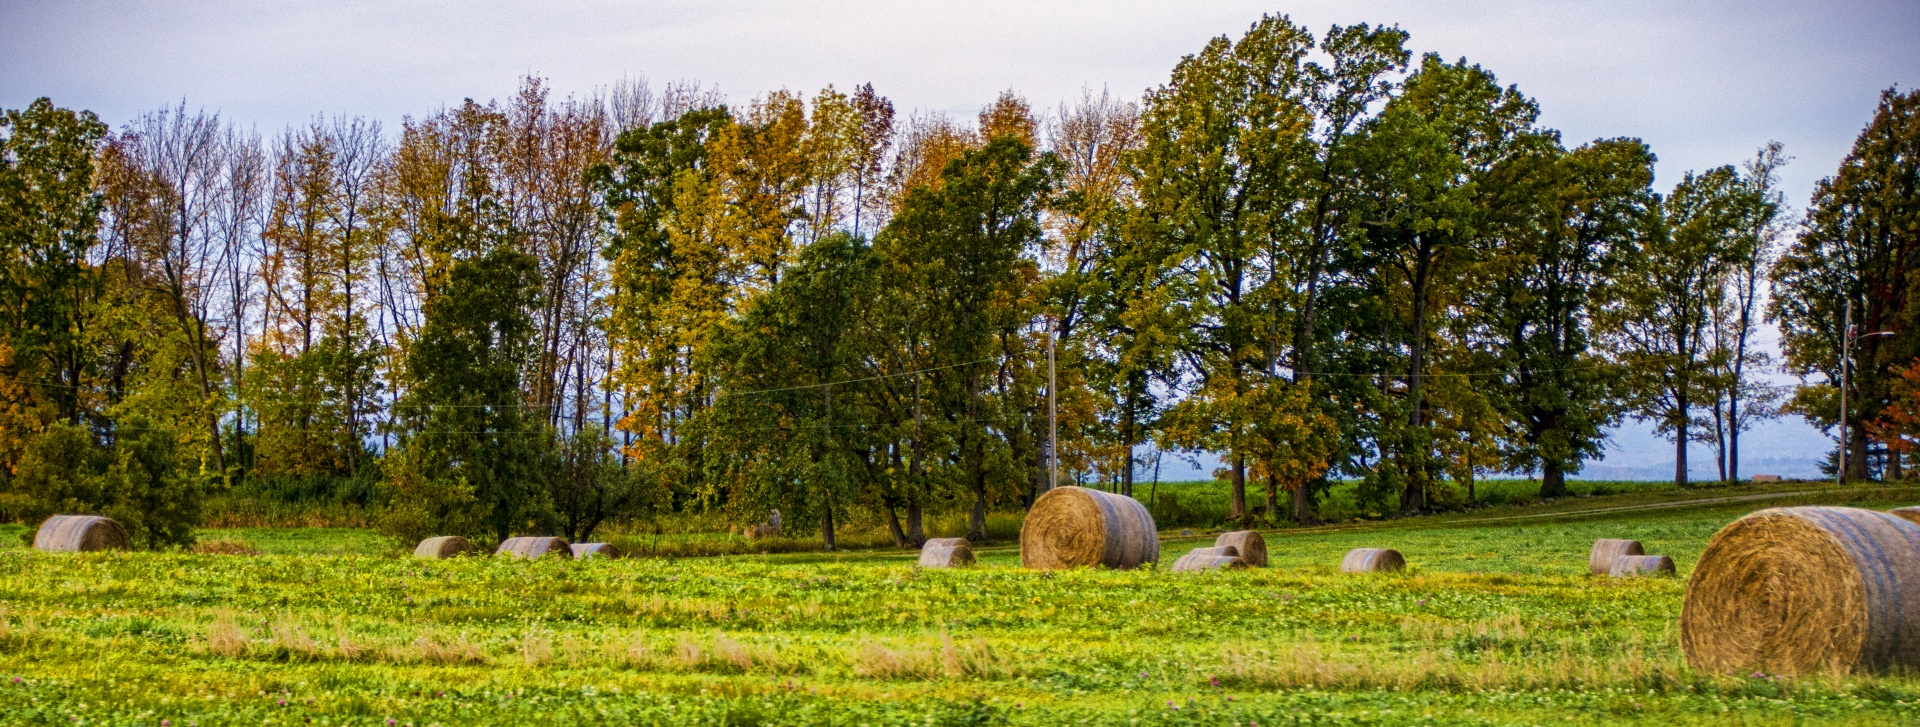 hay bales in a field New England Fall colors